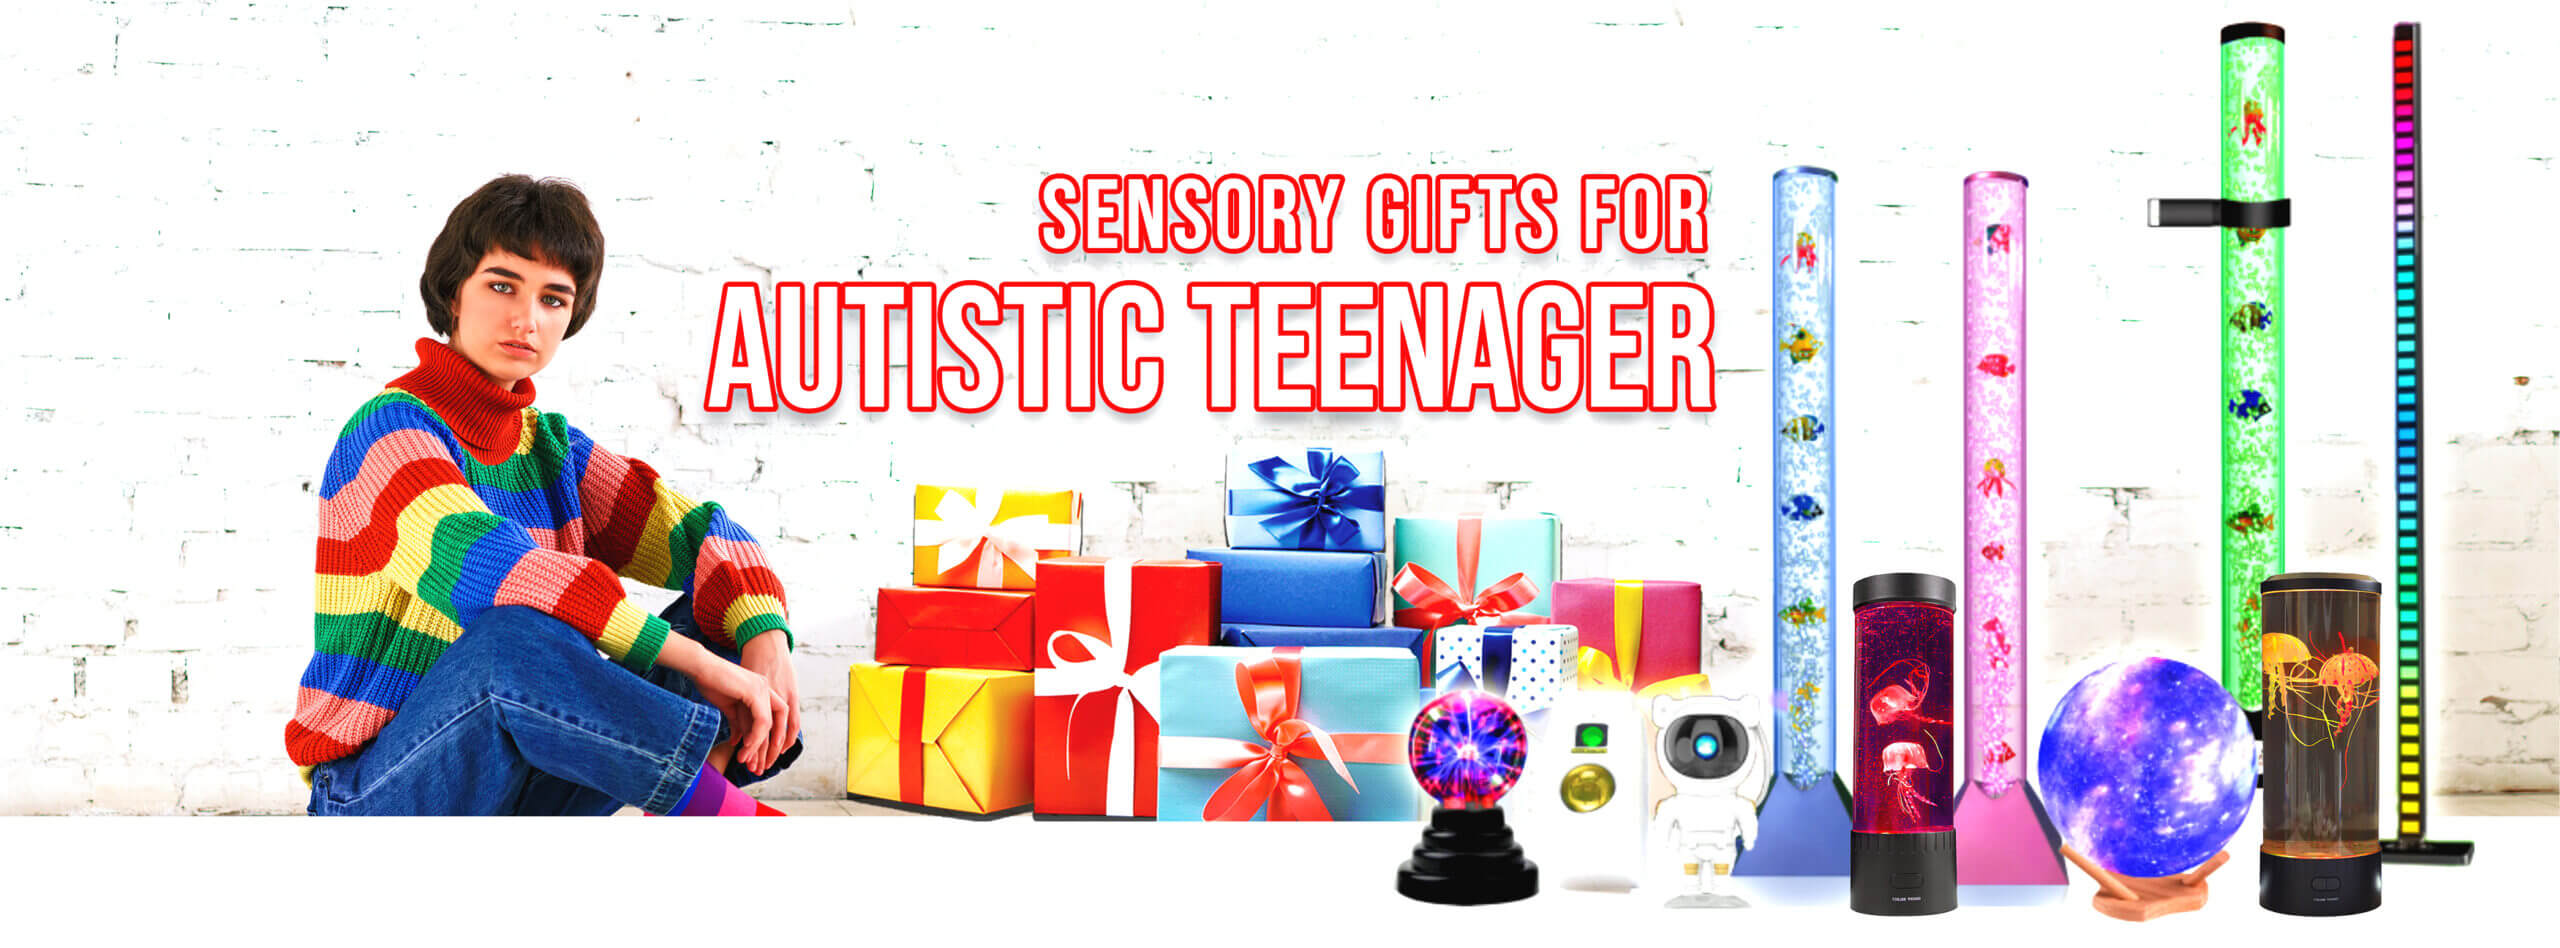 Sensory lamp gifts for autistic teenagers